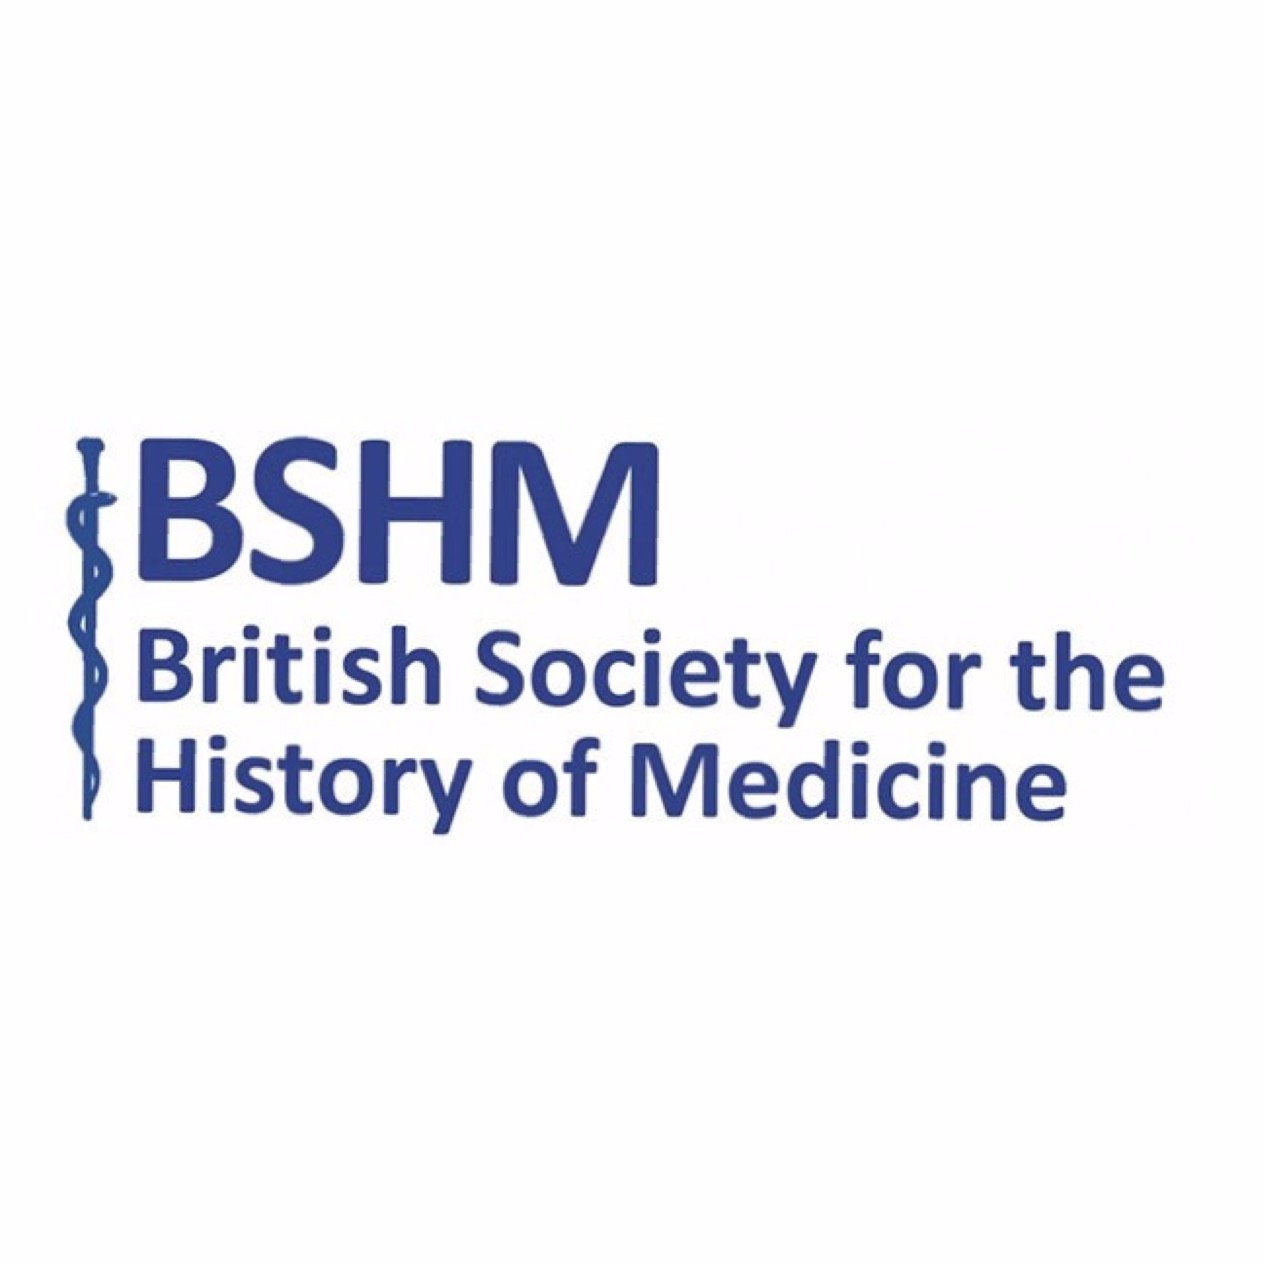 The BSHM is an umbrella organisation which brings together medical history societies and medical museums from all over the UK. https://t.co/u0bfrua69L